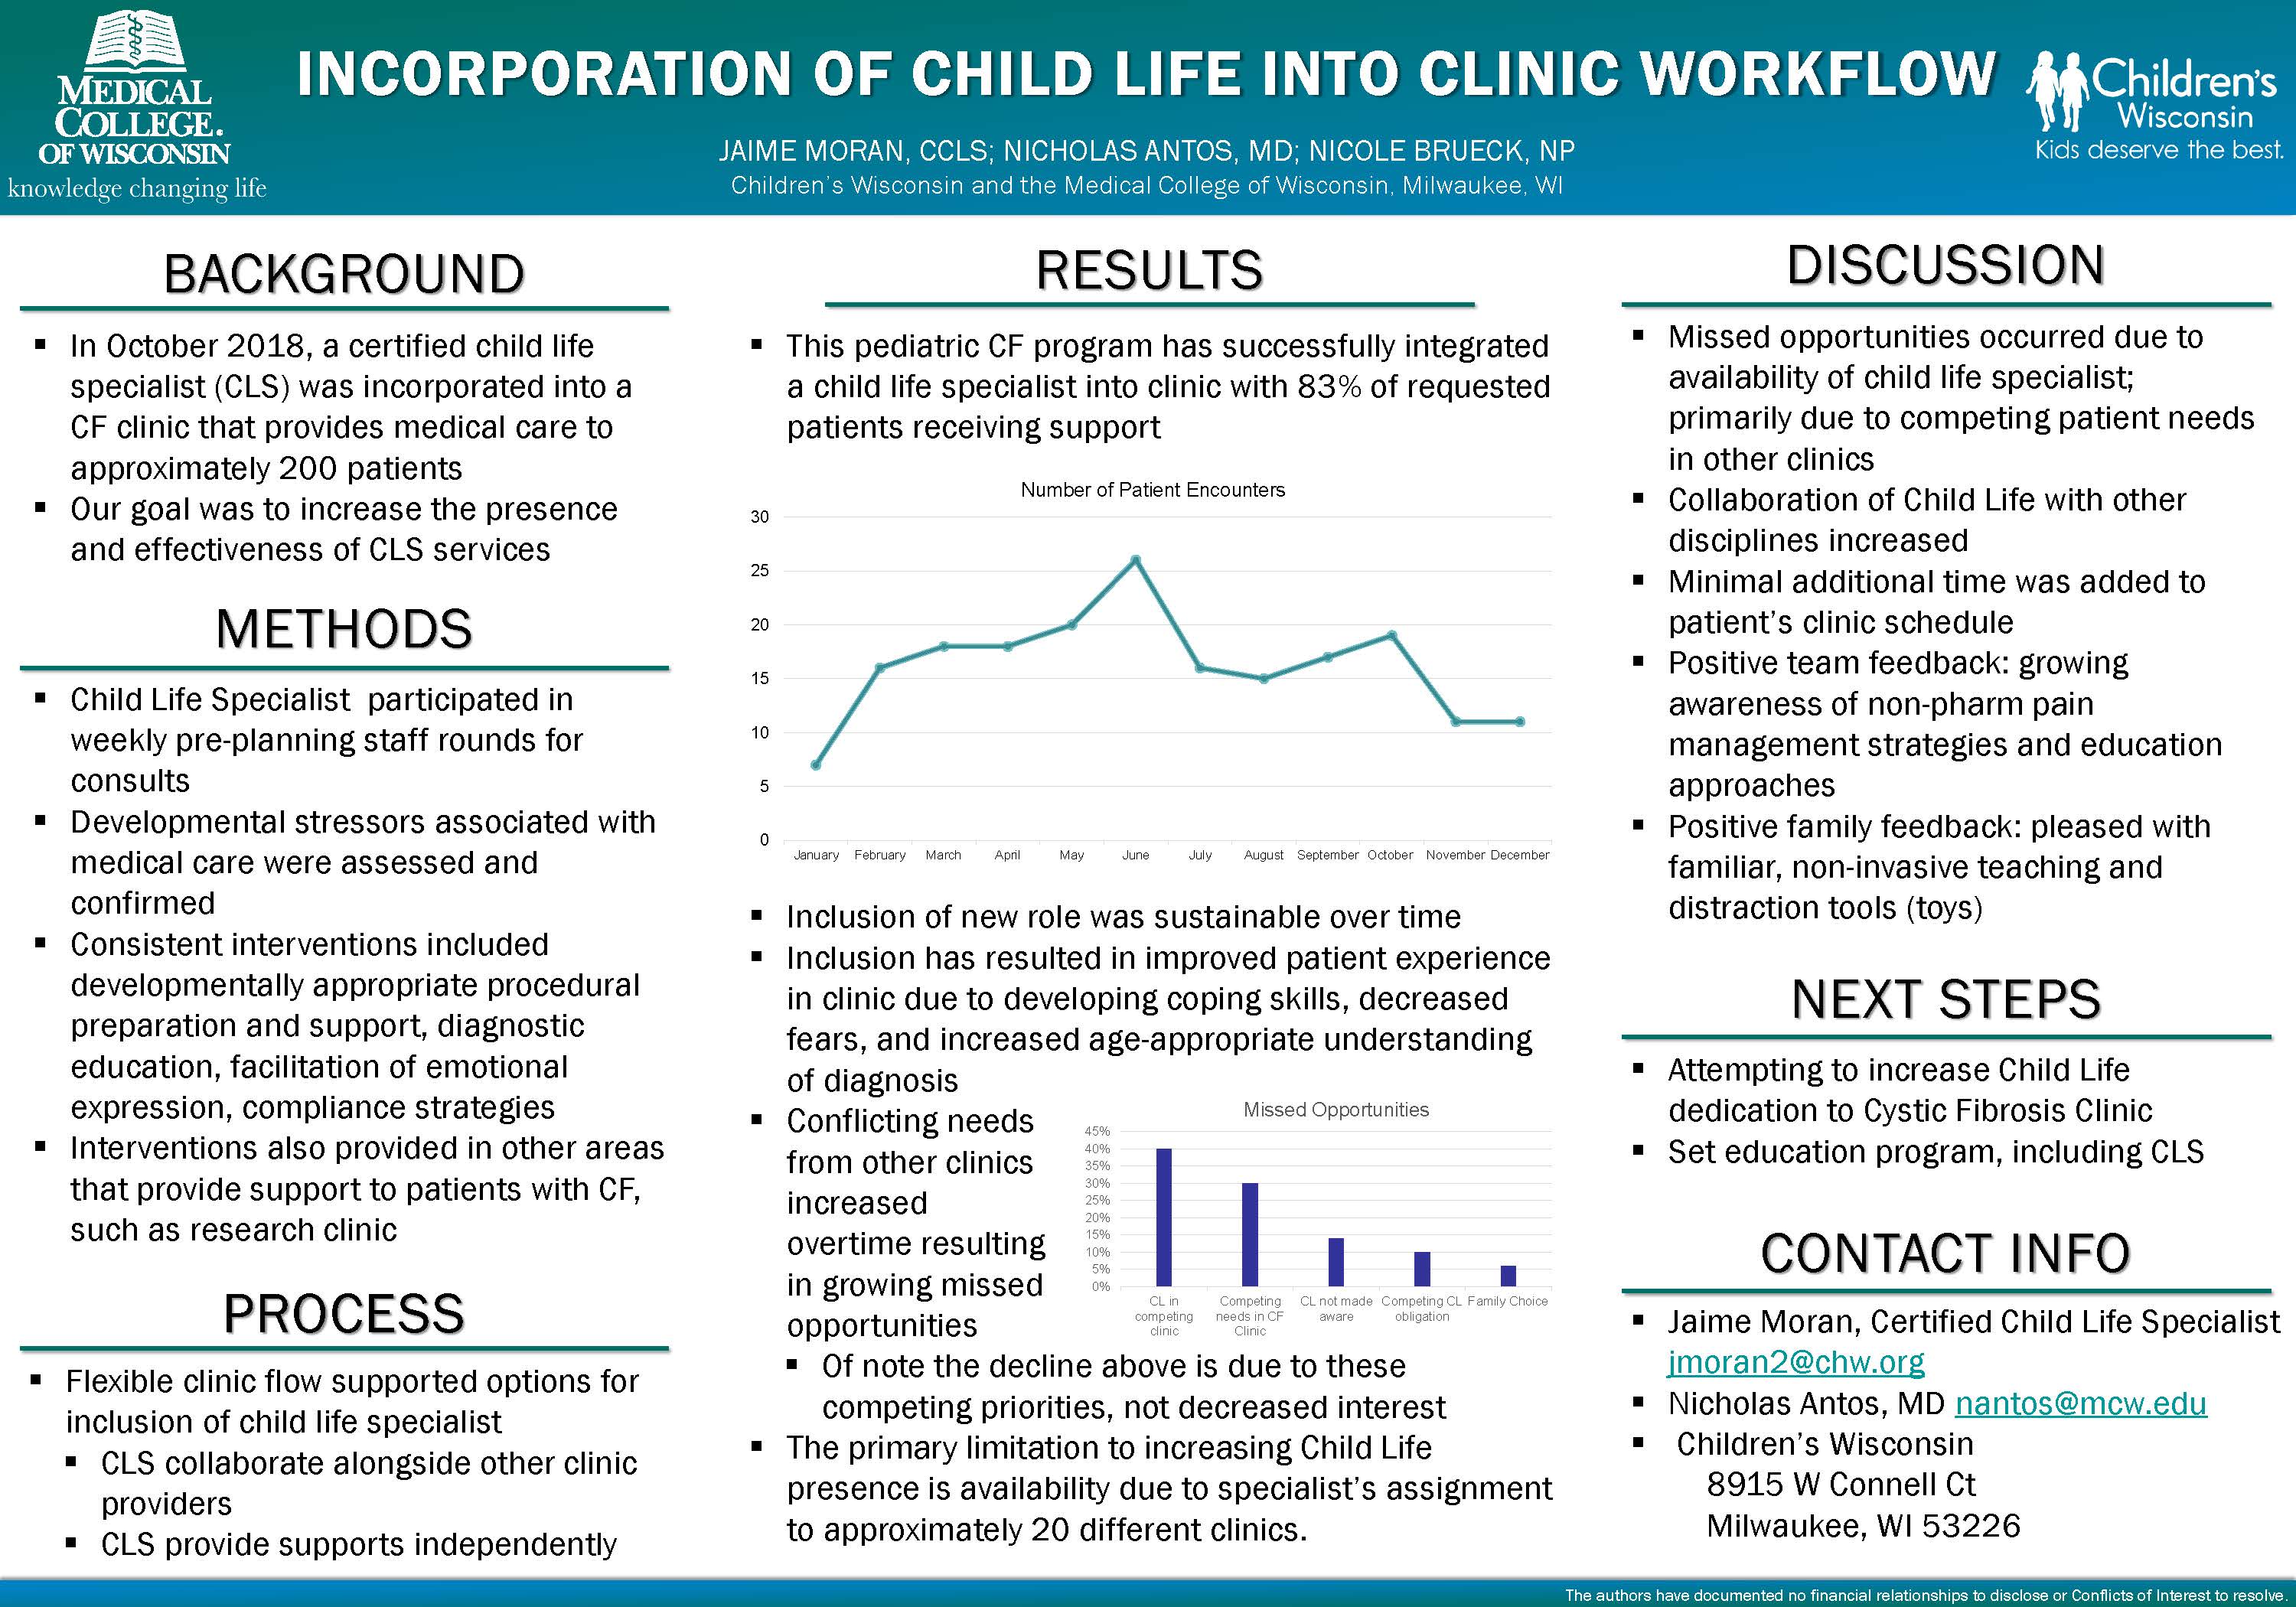 Poster: Incorporation of Child Life into Clinic Workflow